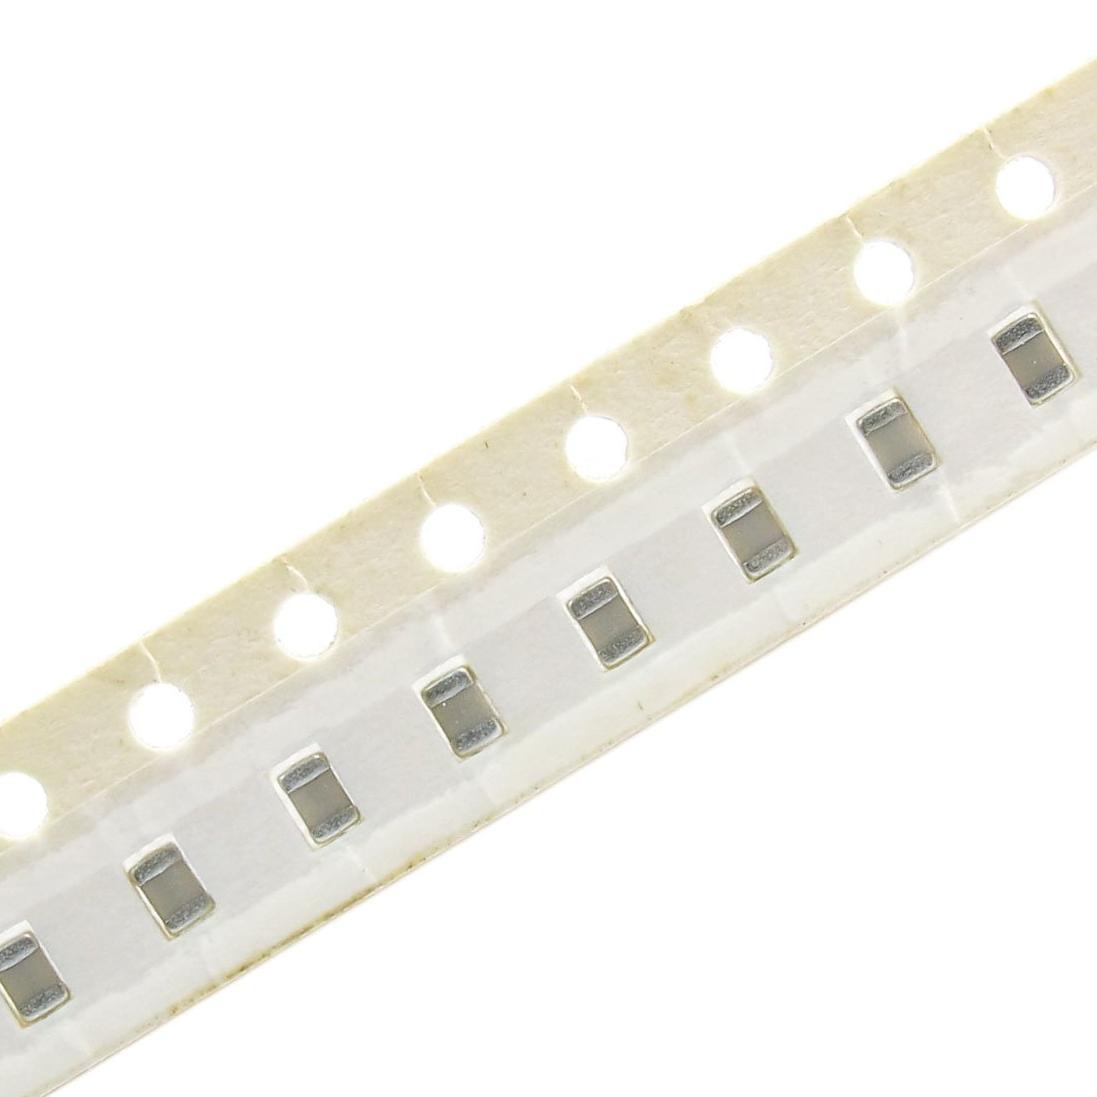  SMD 33pF 0805 C0G(NP0)